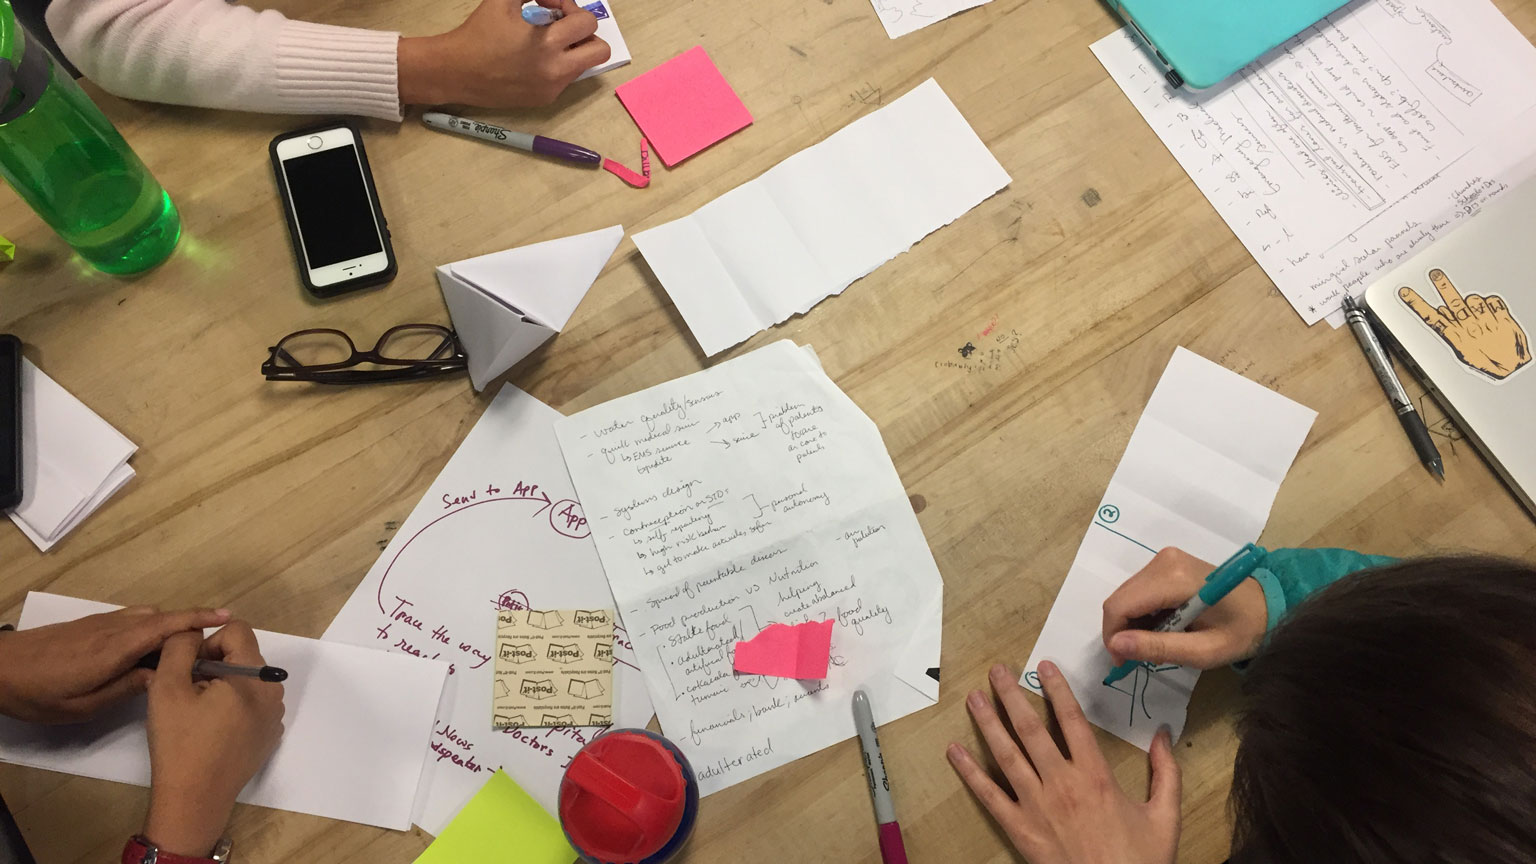 Hands surround a table full of post-it notes and sketches during a brainstorming session. 